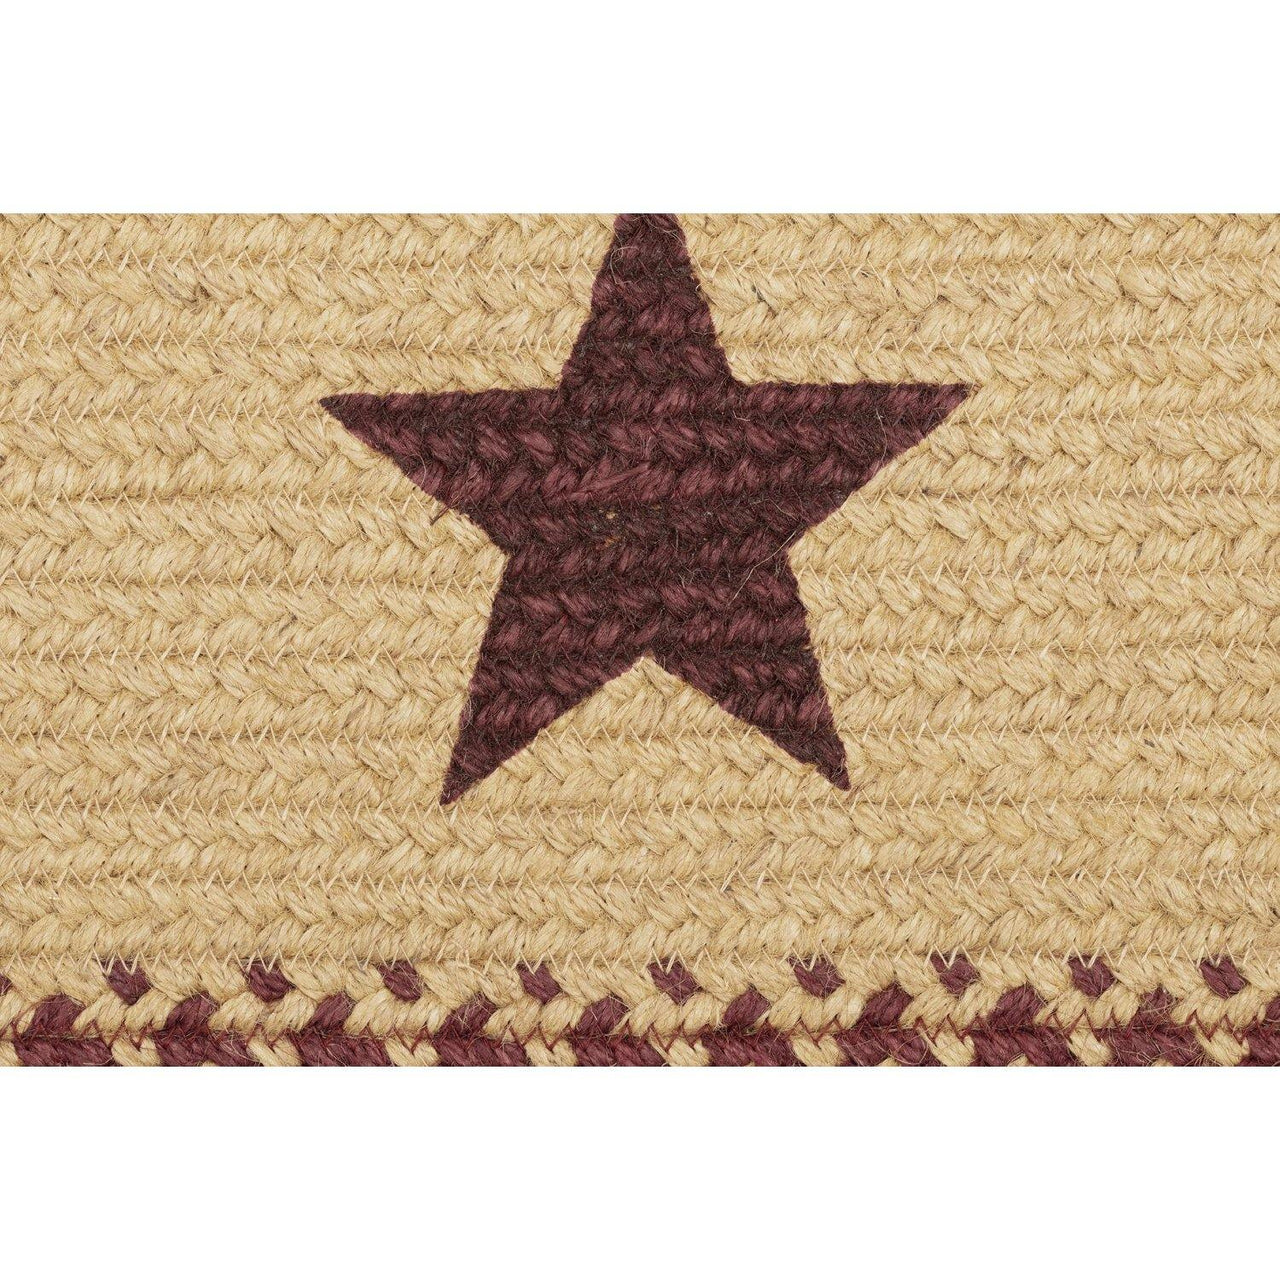 Burgundy Red Primitive Jute Braided Rug Oval Stencil Stars 3'x5' with Rug Pad VHC Brands - The Fox Decor